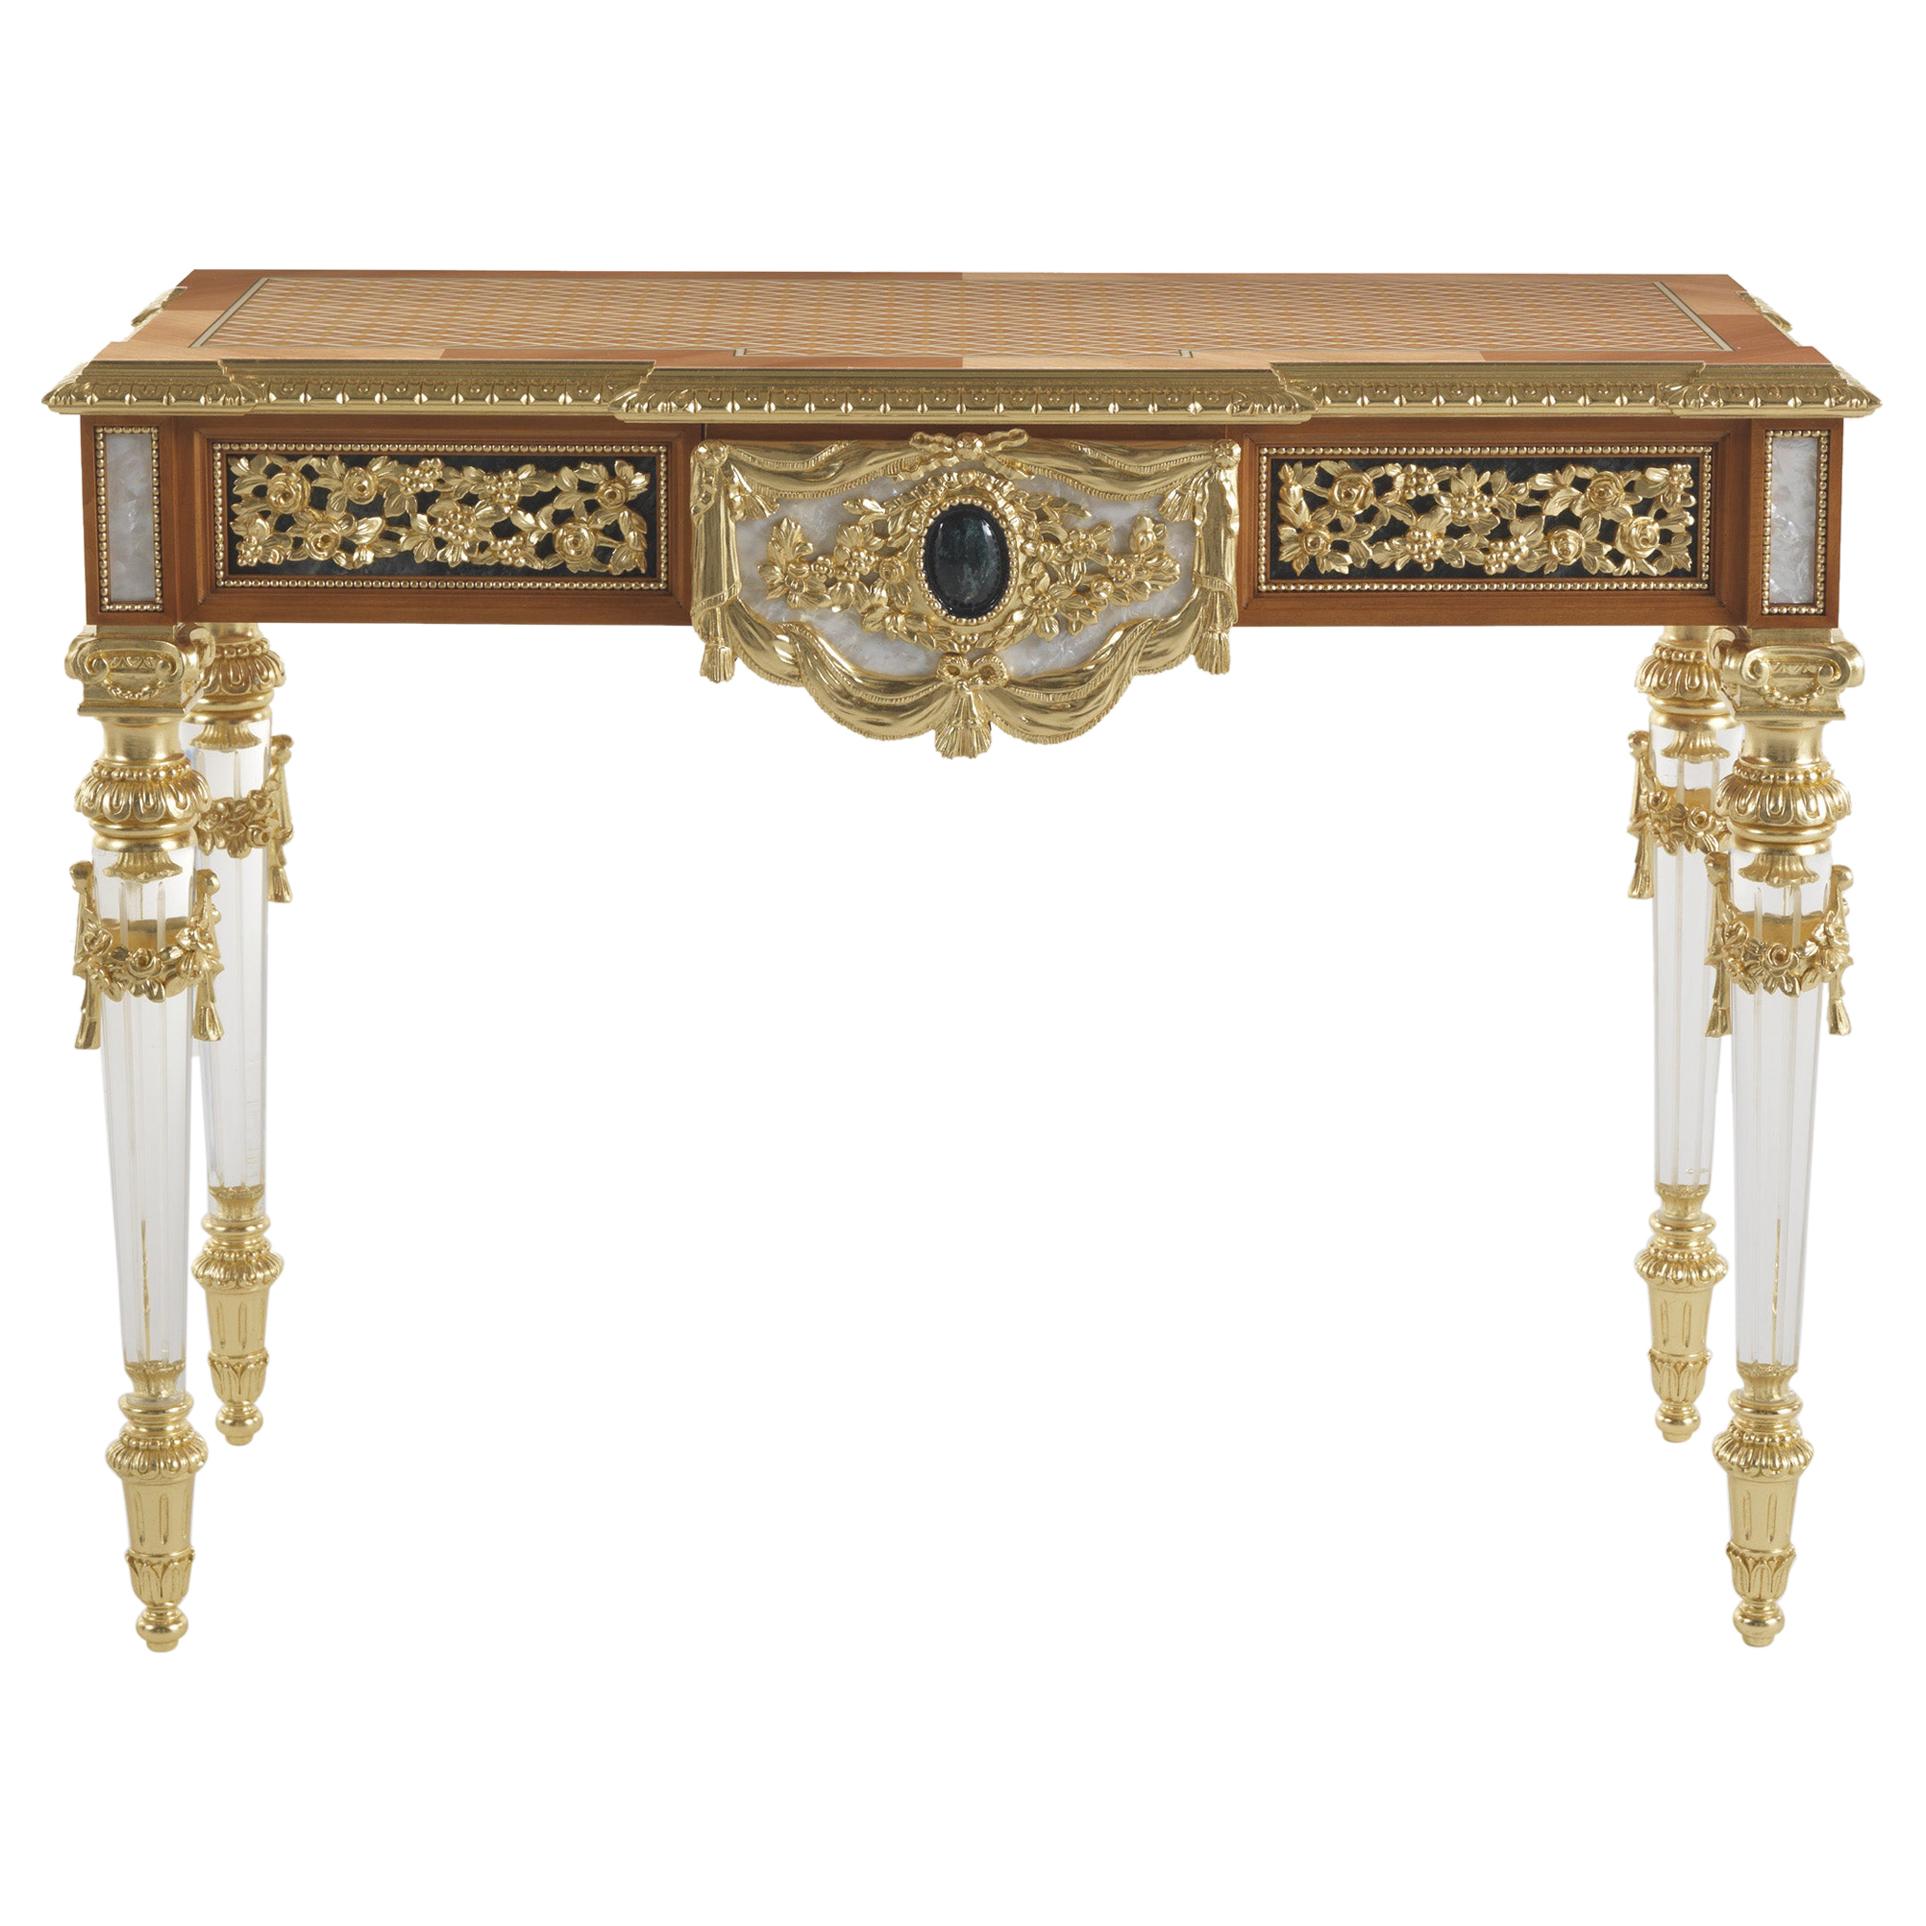 21st Century Mystere Console with Hand-carved Details Finished in Gold Leaf